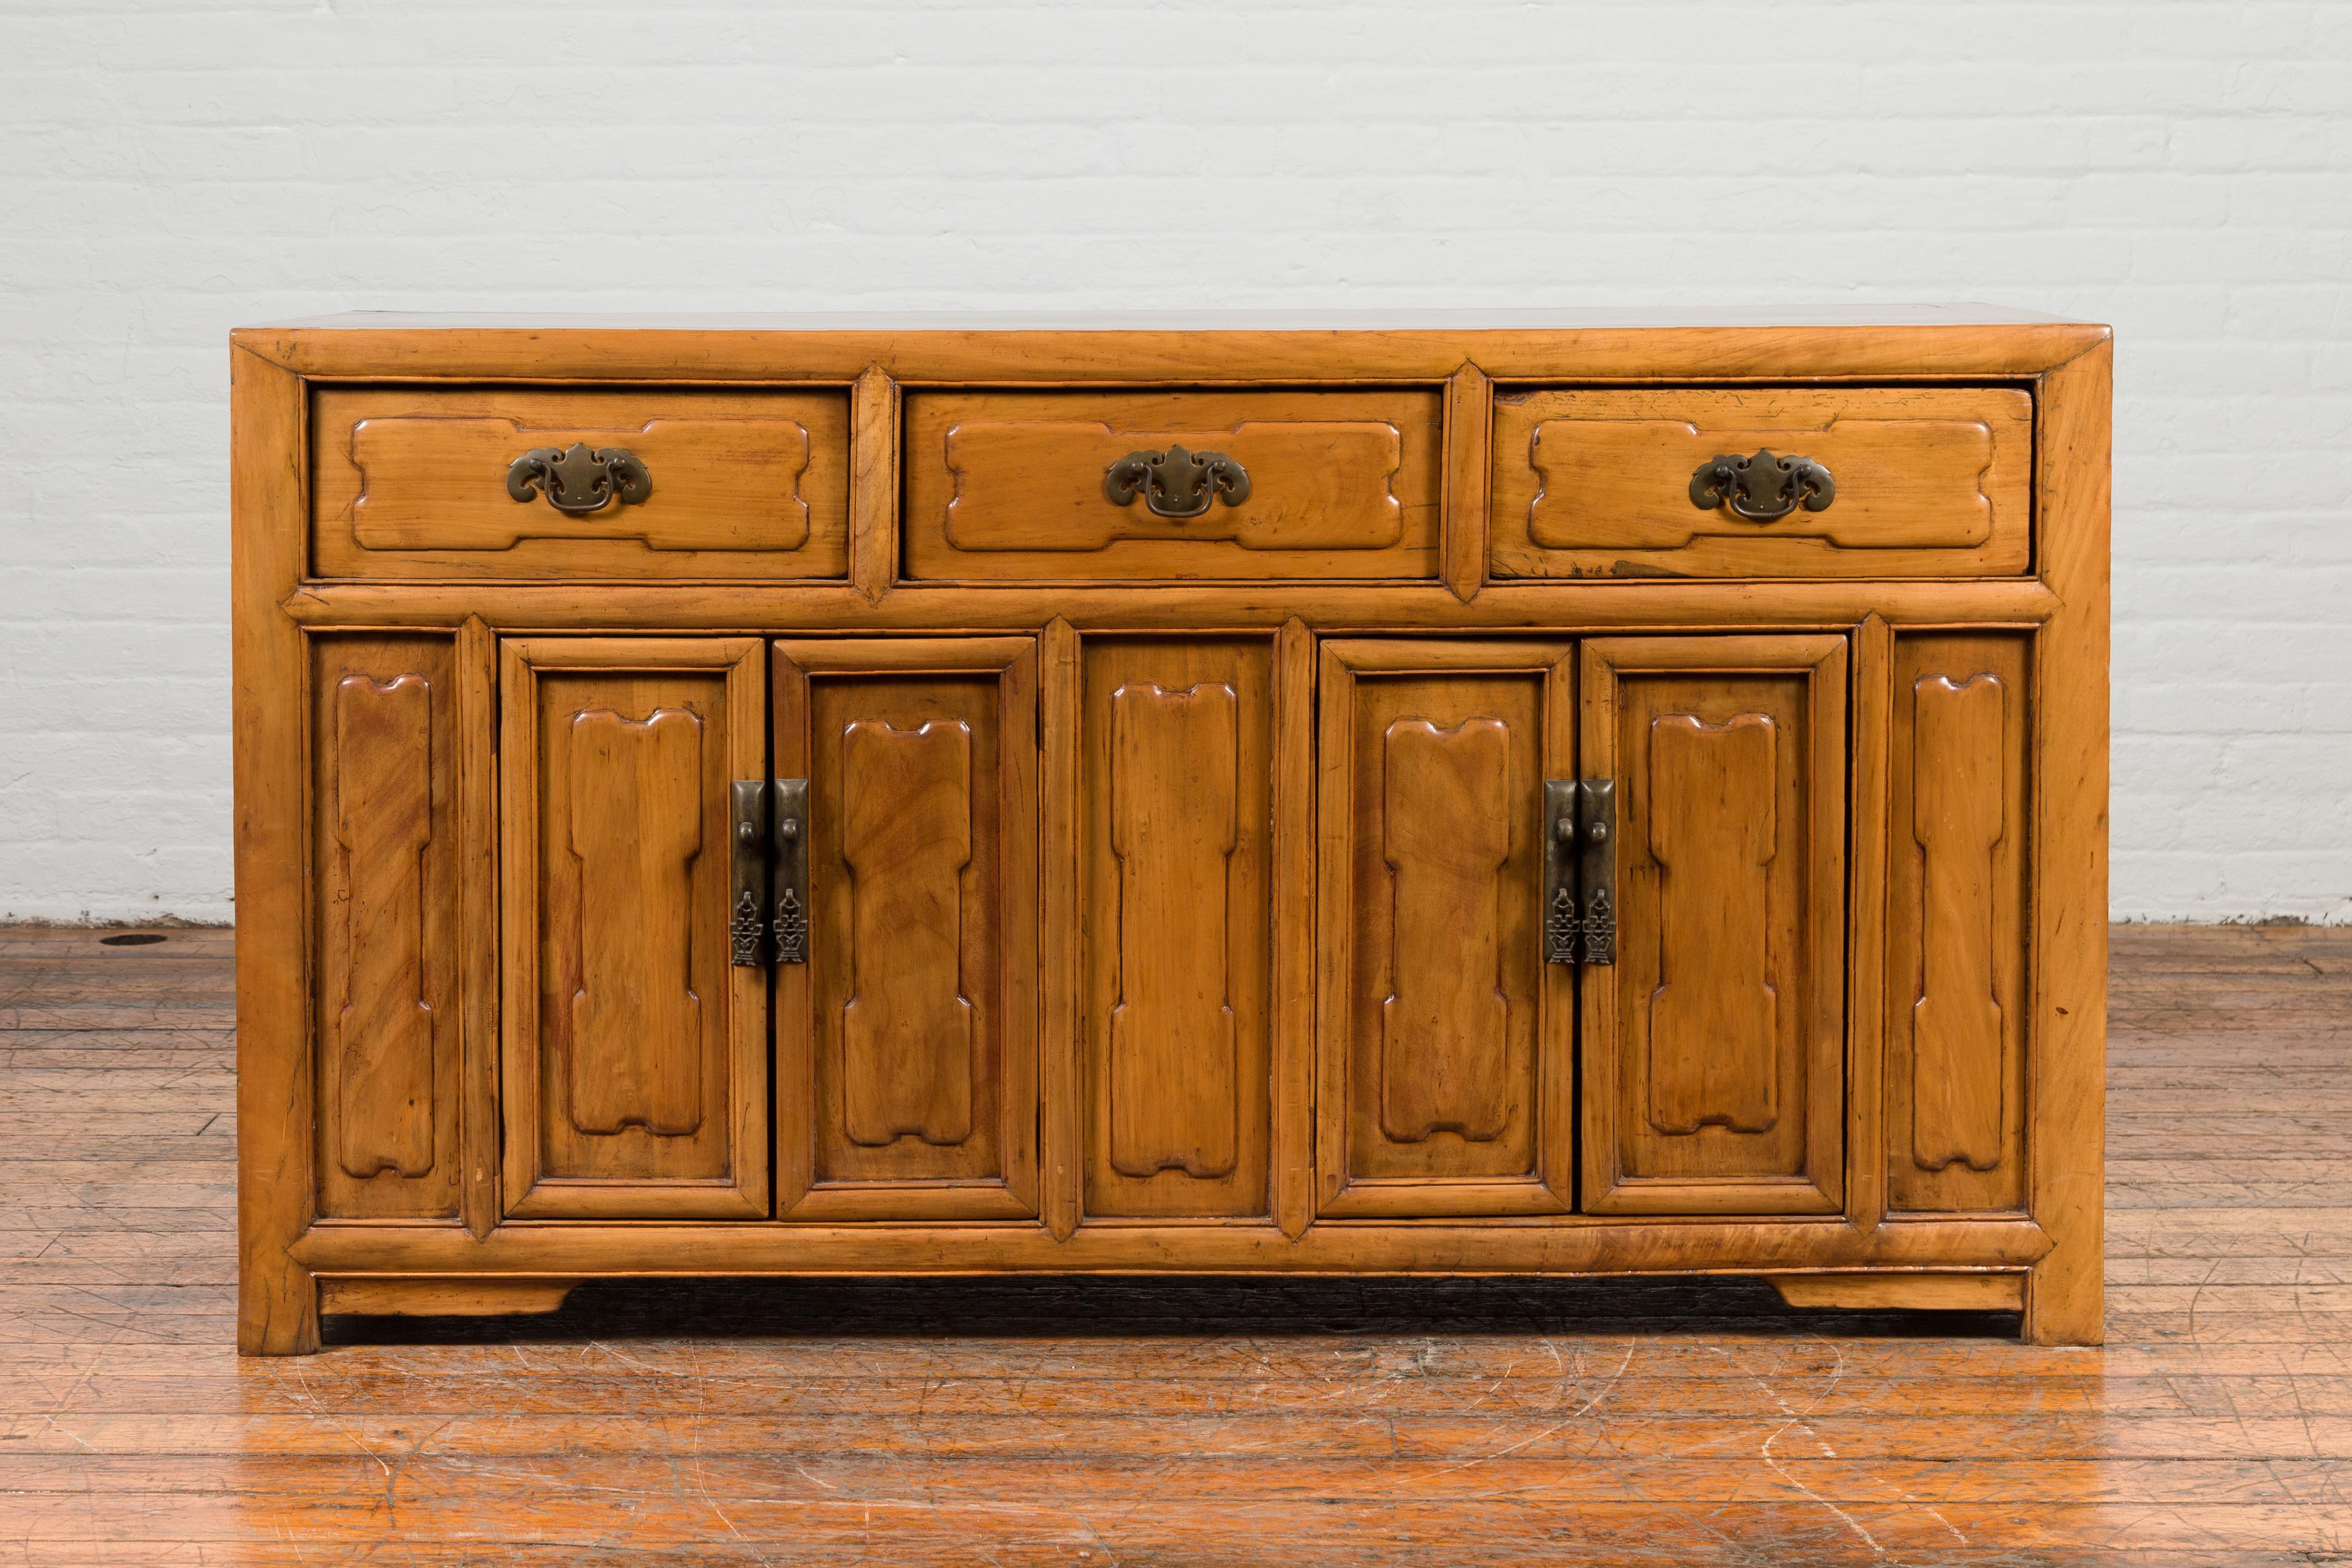 An antique Chinese elmwood sideboard from the early 20th century, with raised panels and three drawers over four doors. Created in China during the early years of the 20th century, this sideboard features a rectangular top with central board,